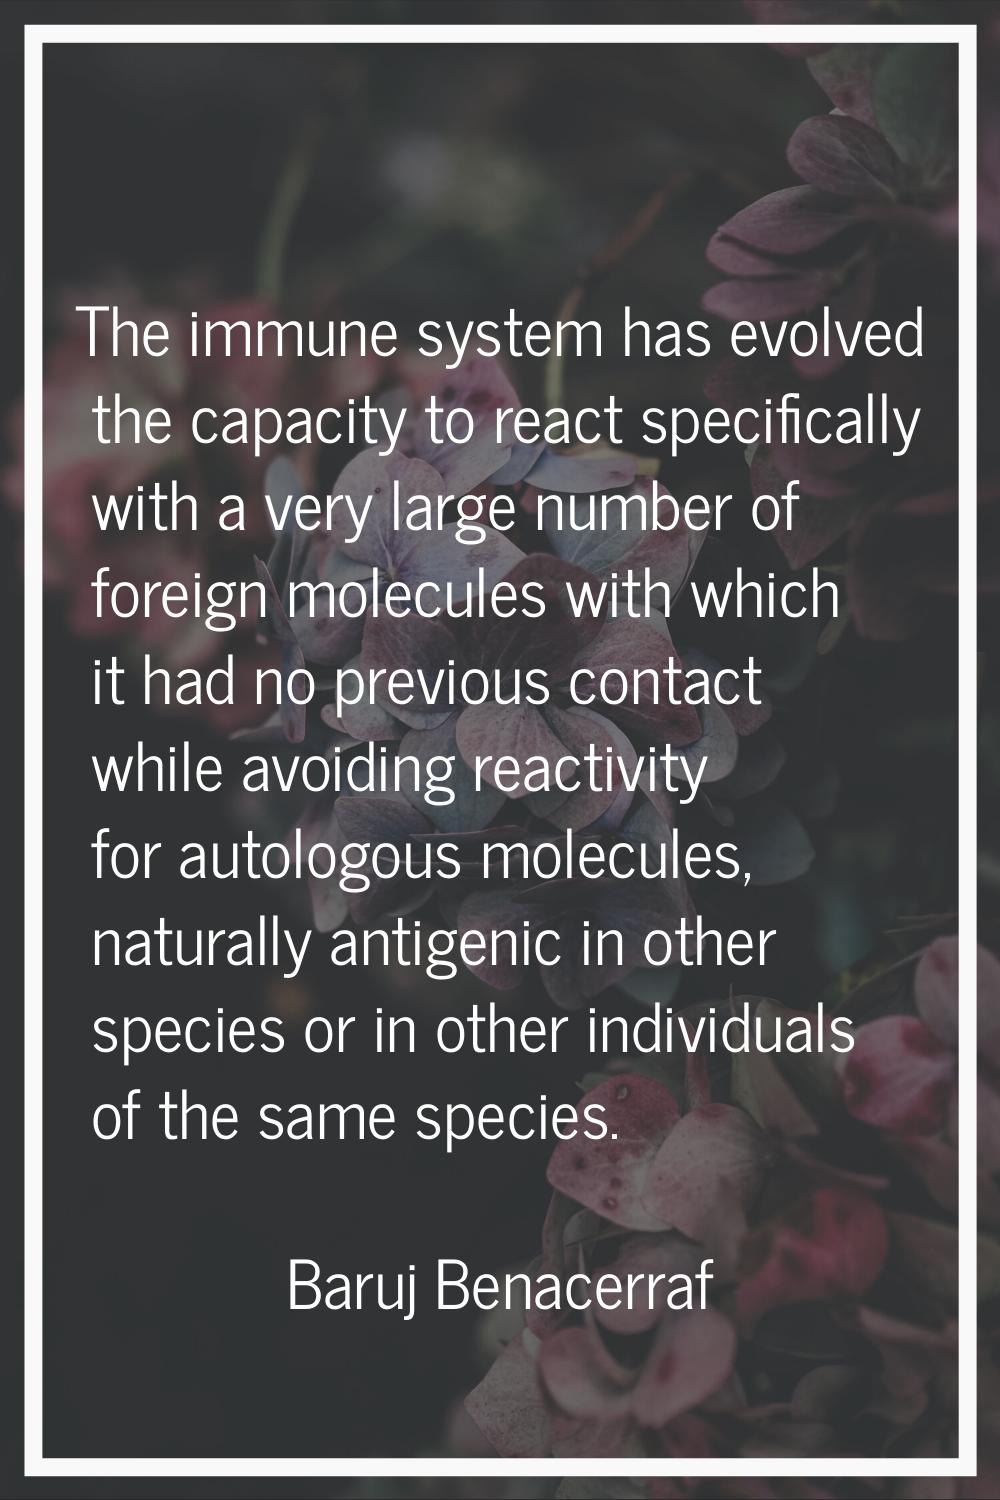 The immune system has evolved the capacity to react specifically with a very large number of foreig